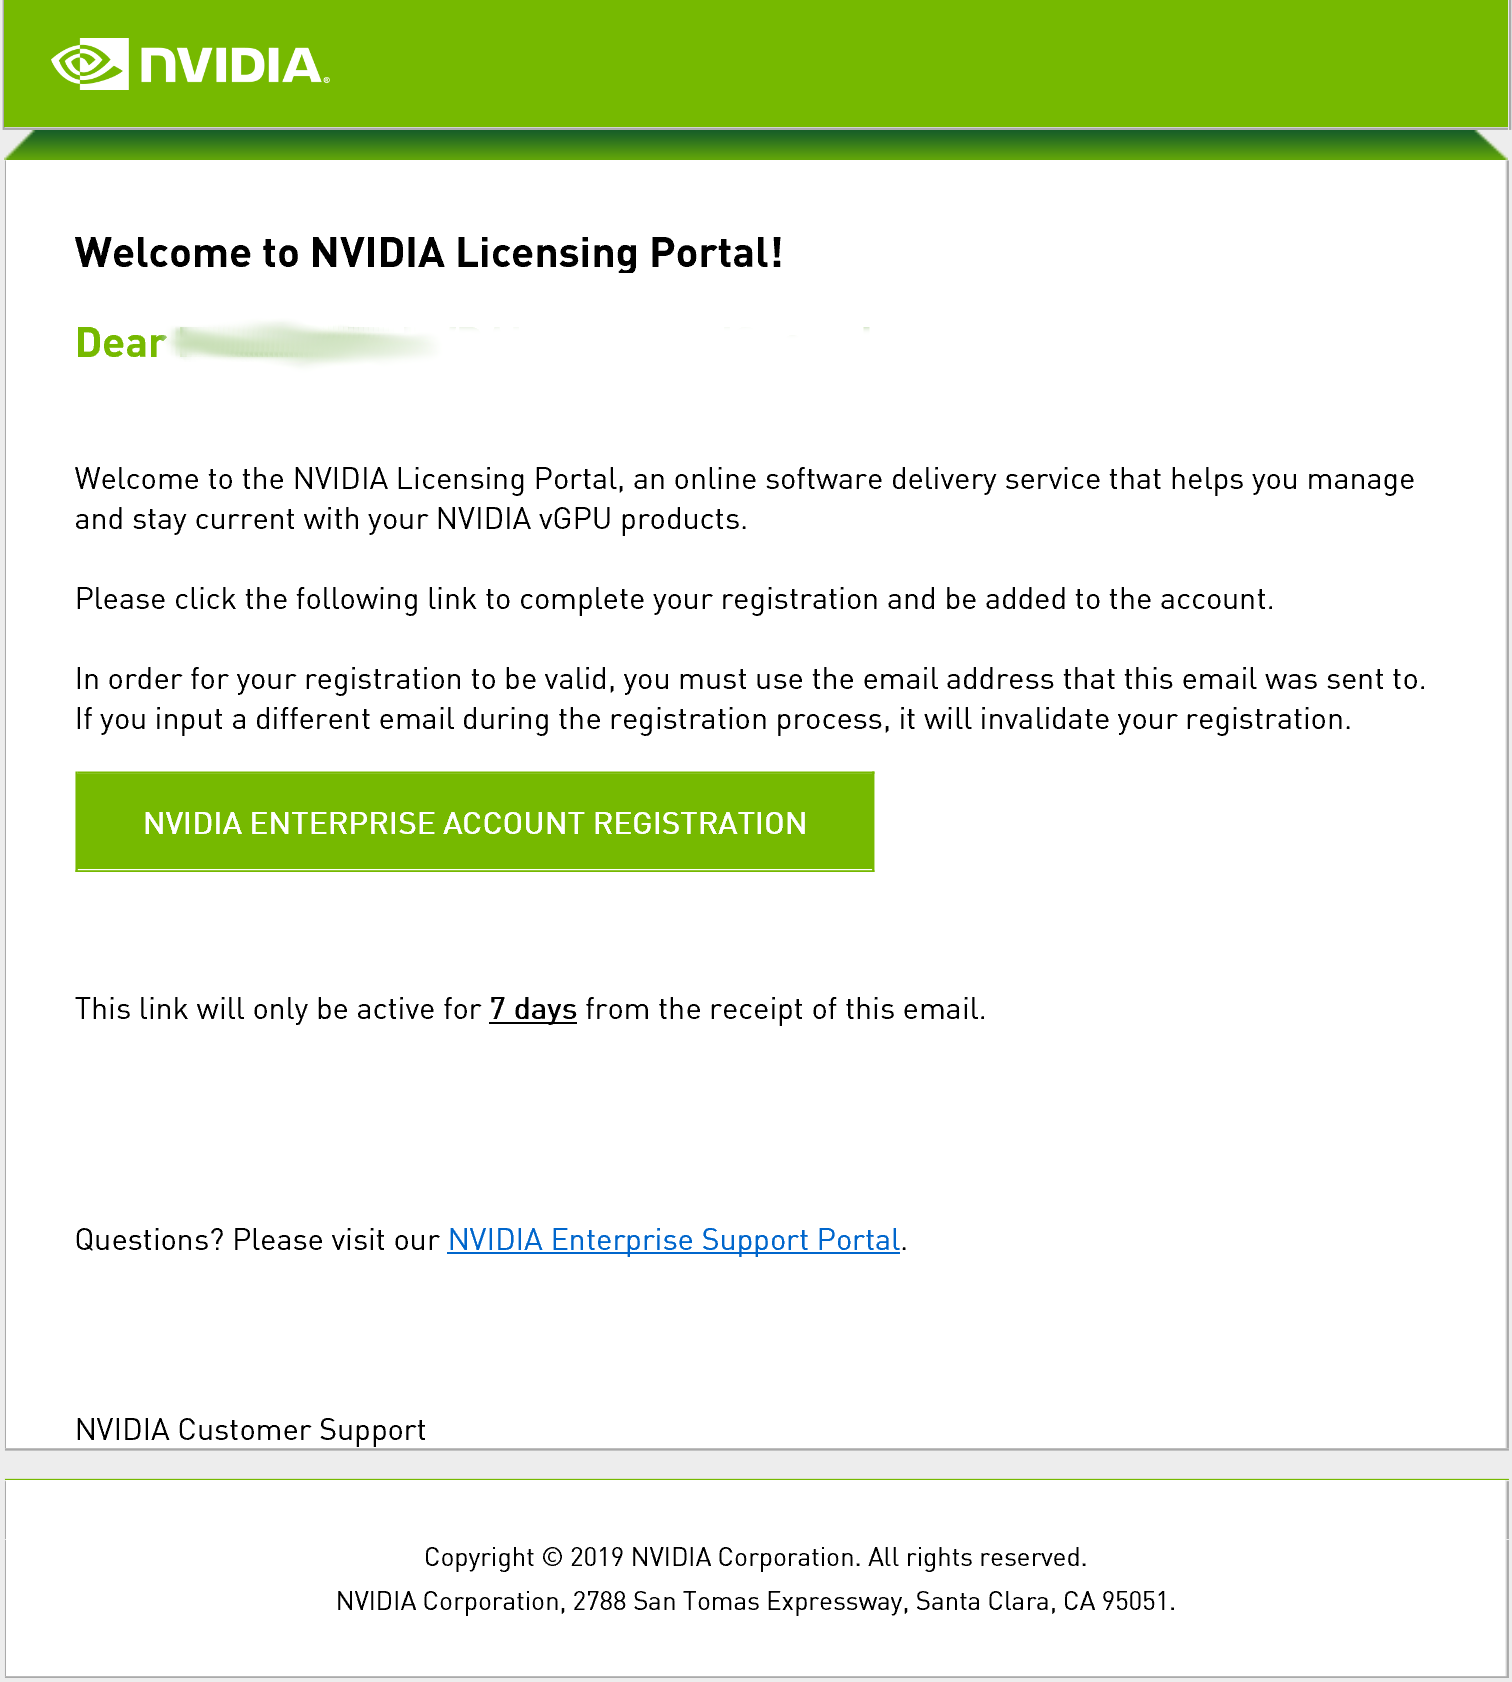 Screen capture showing the e-mail that is sent to a contact who has been added to the NVIDIA Licensing Portal.